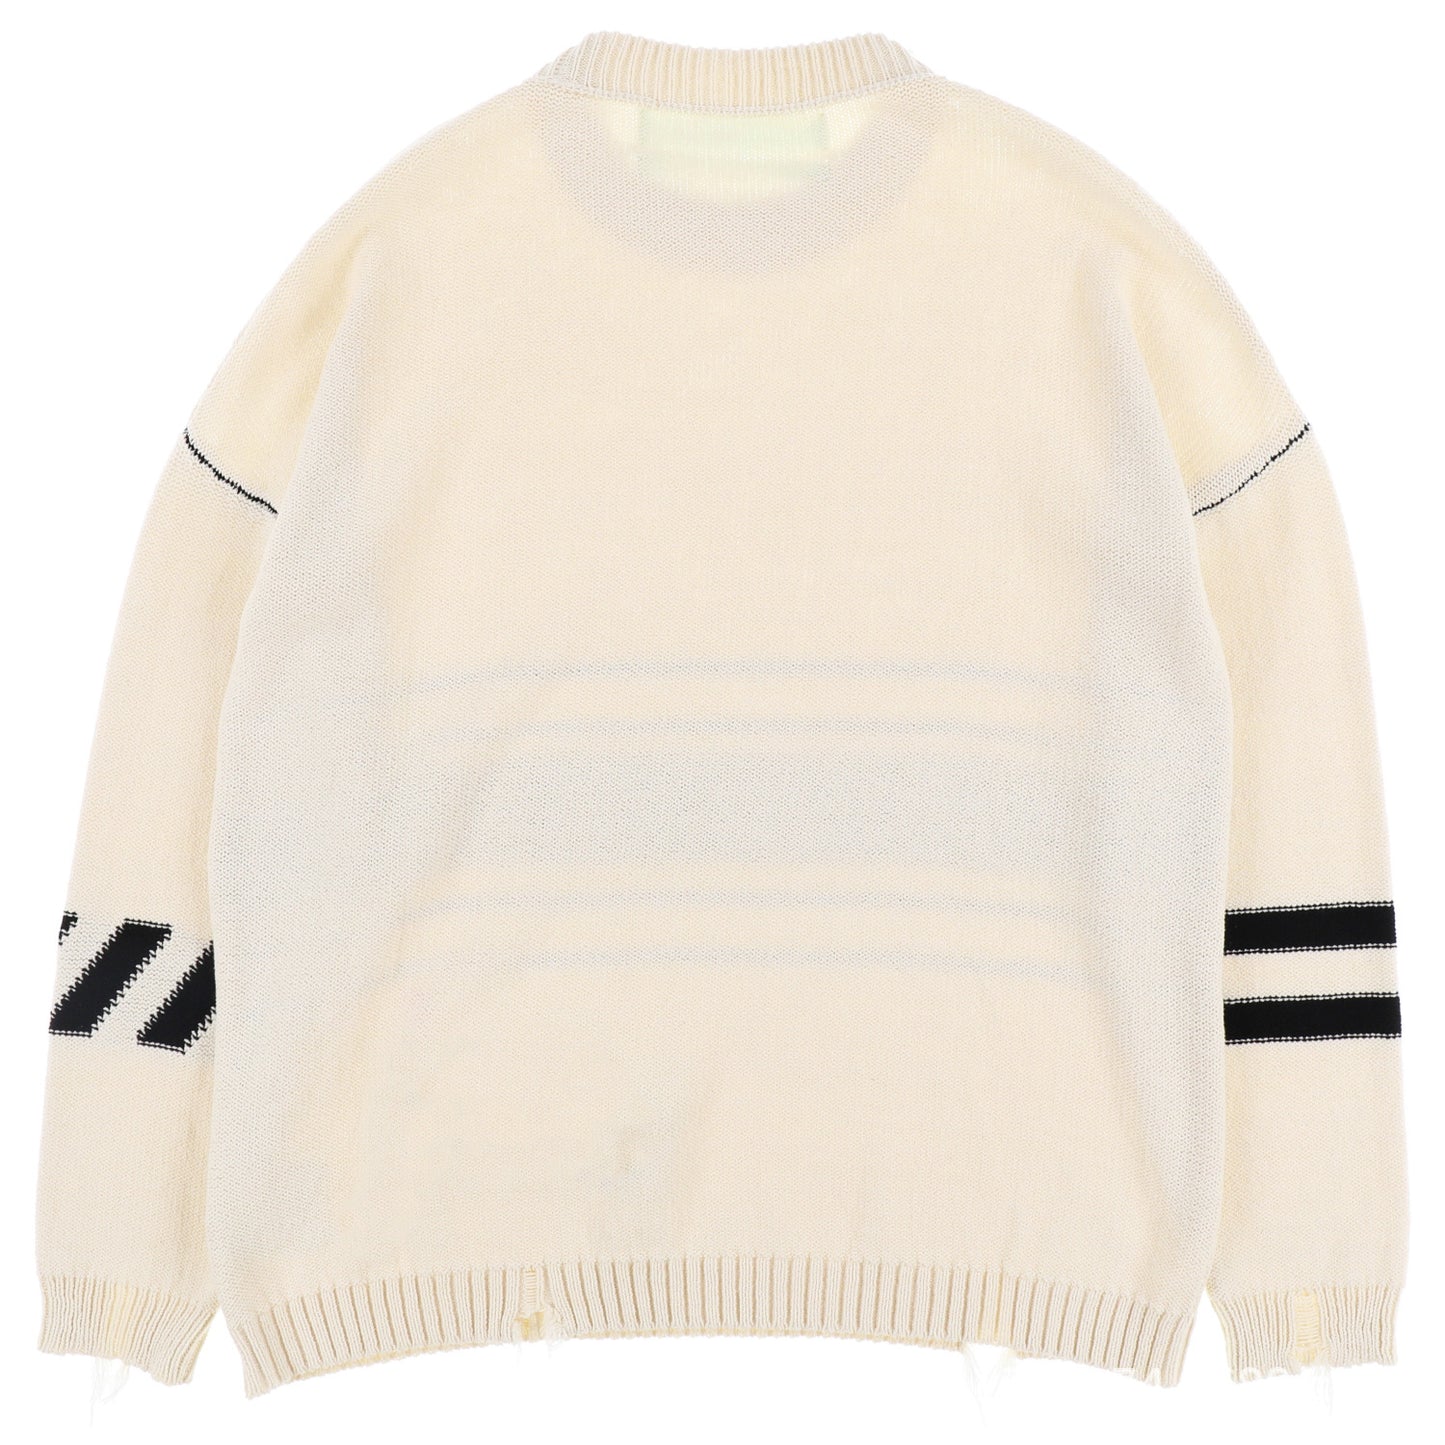 Stray Kids Bang Chan Inspired Off-White coloured Knitted Pullover